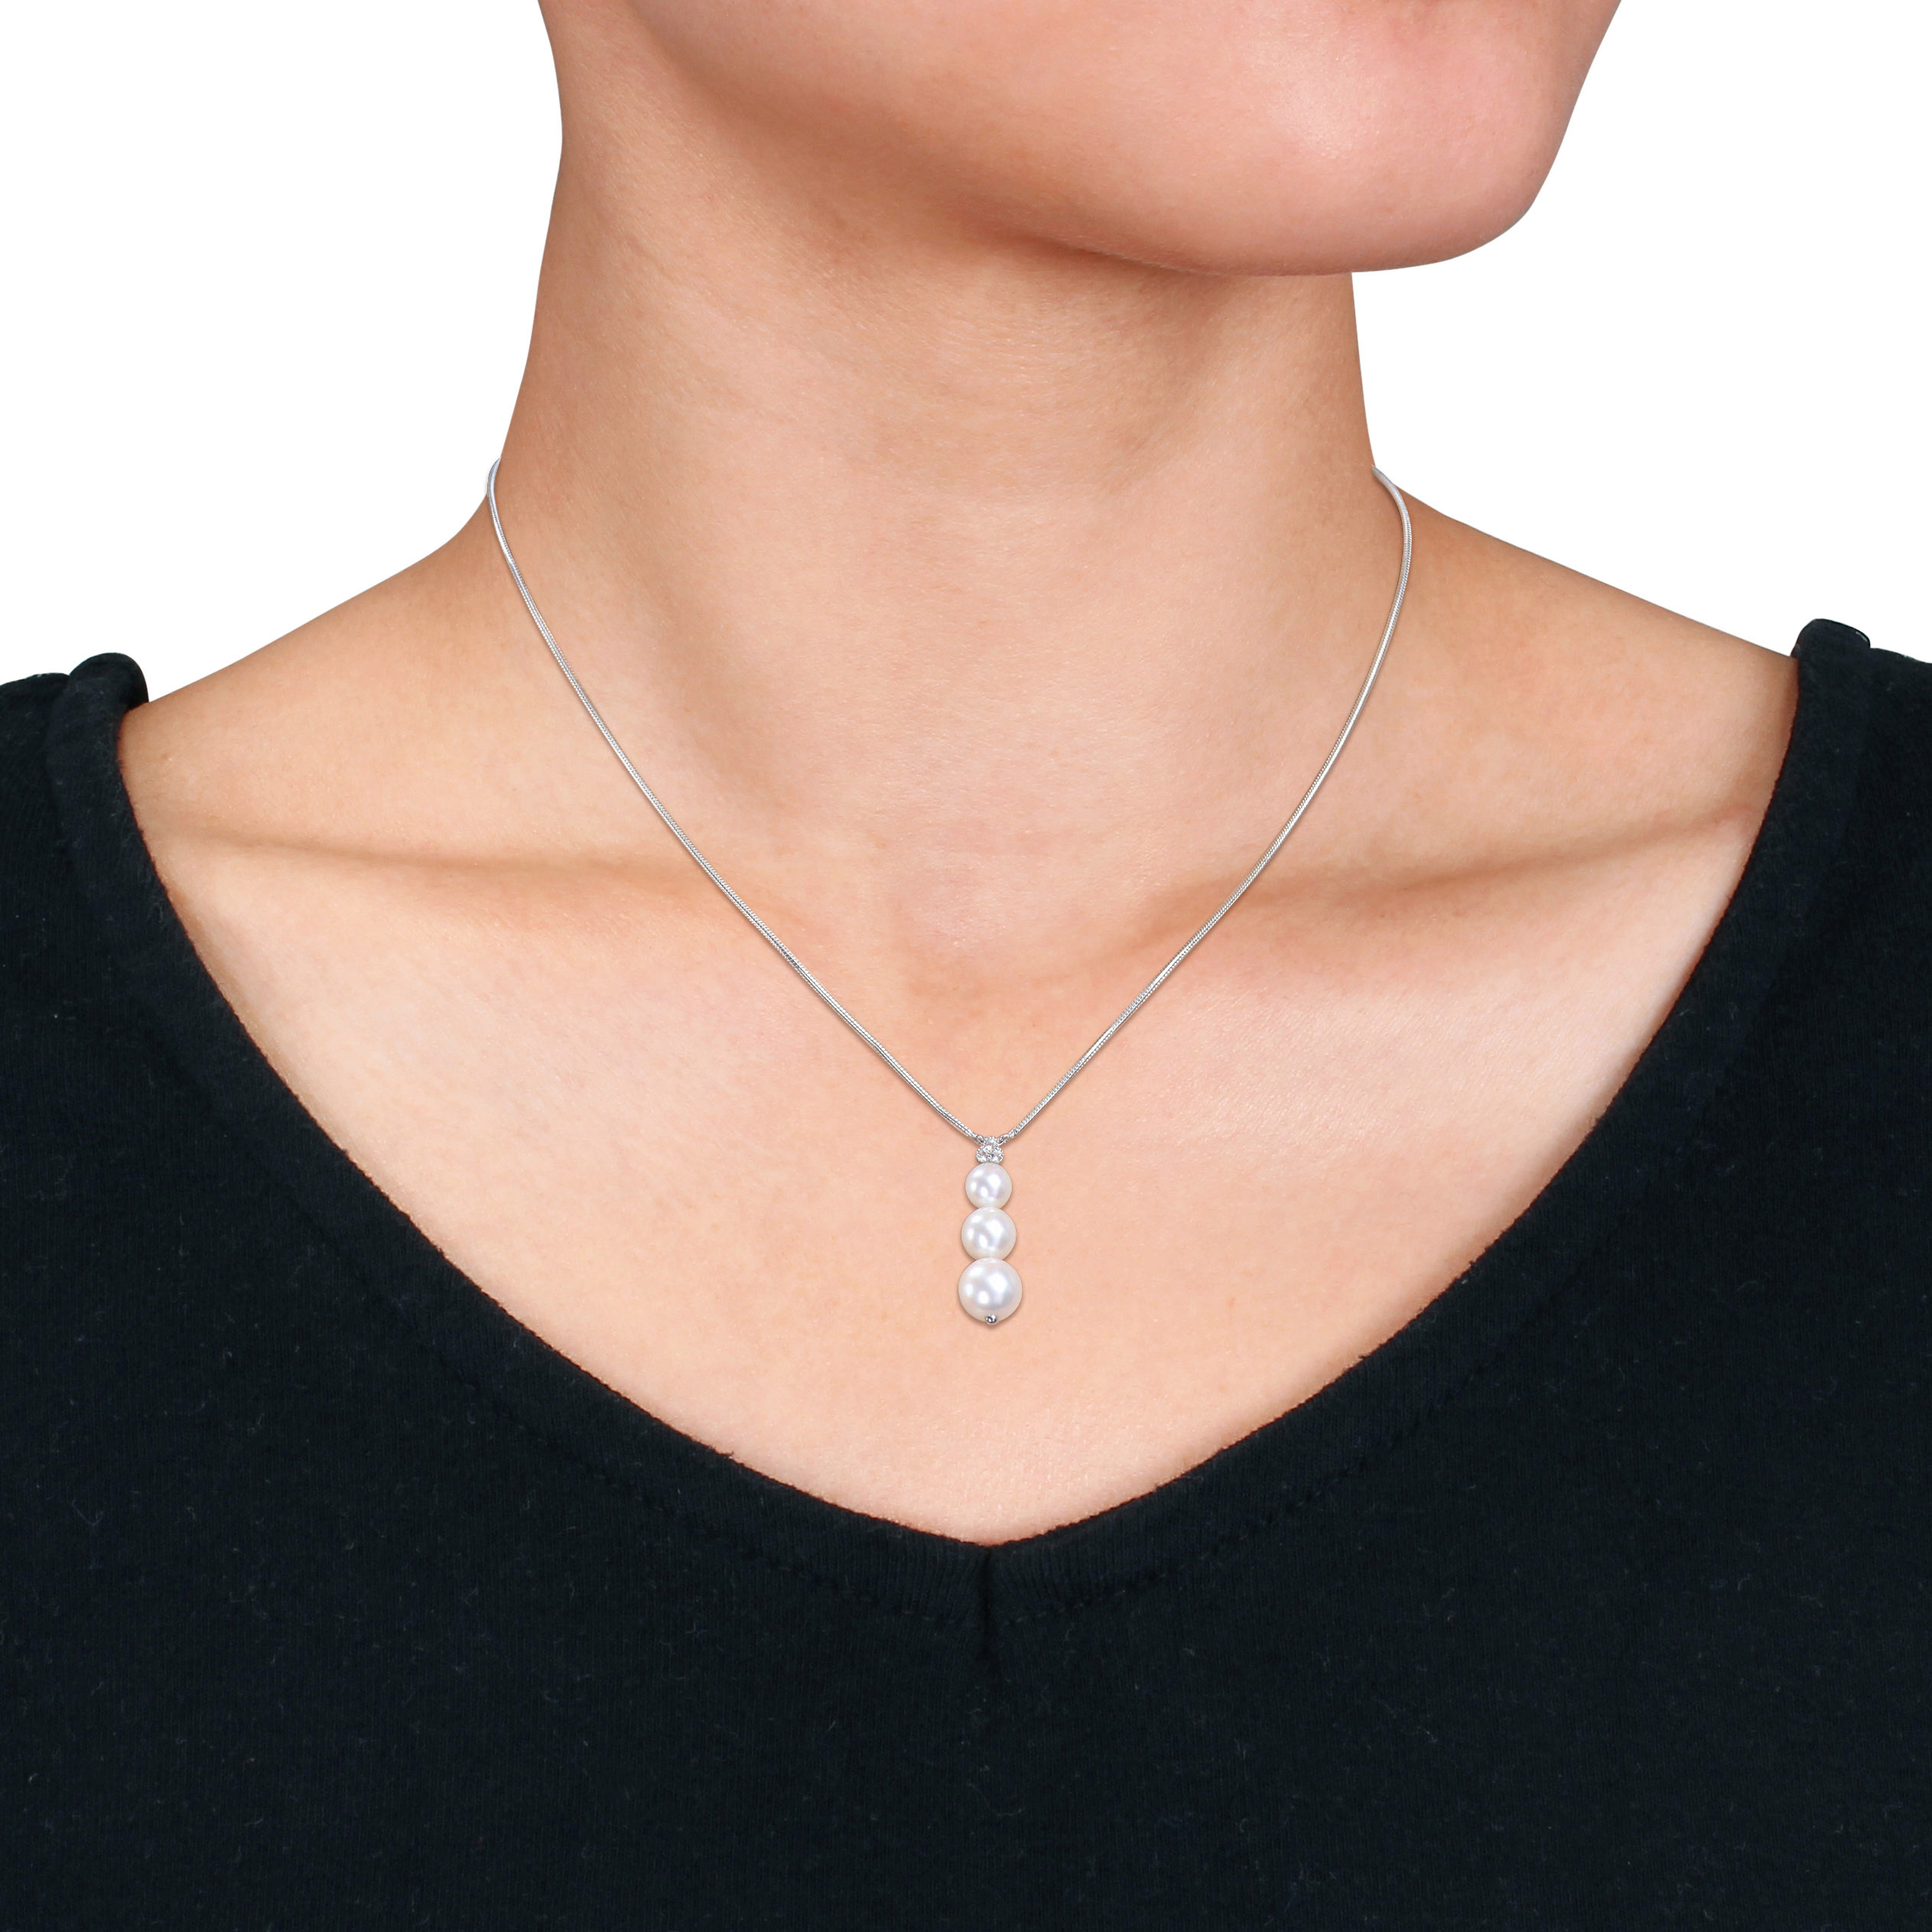 Freshwater Cultured Pearl and 1/10 CT TGW White Topaz Graduated Pendant with Chain in Sterling Silver - 18 in.